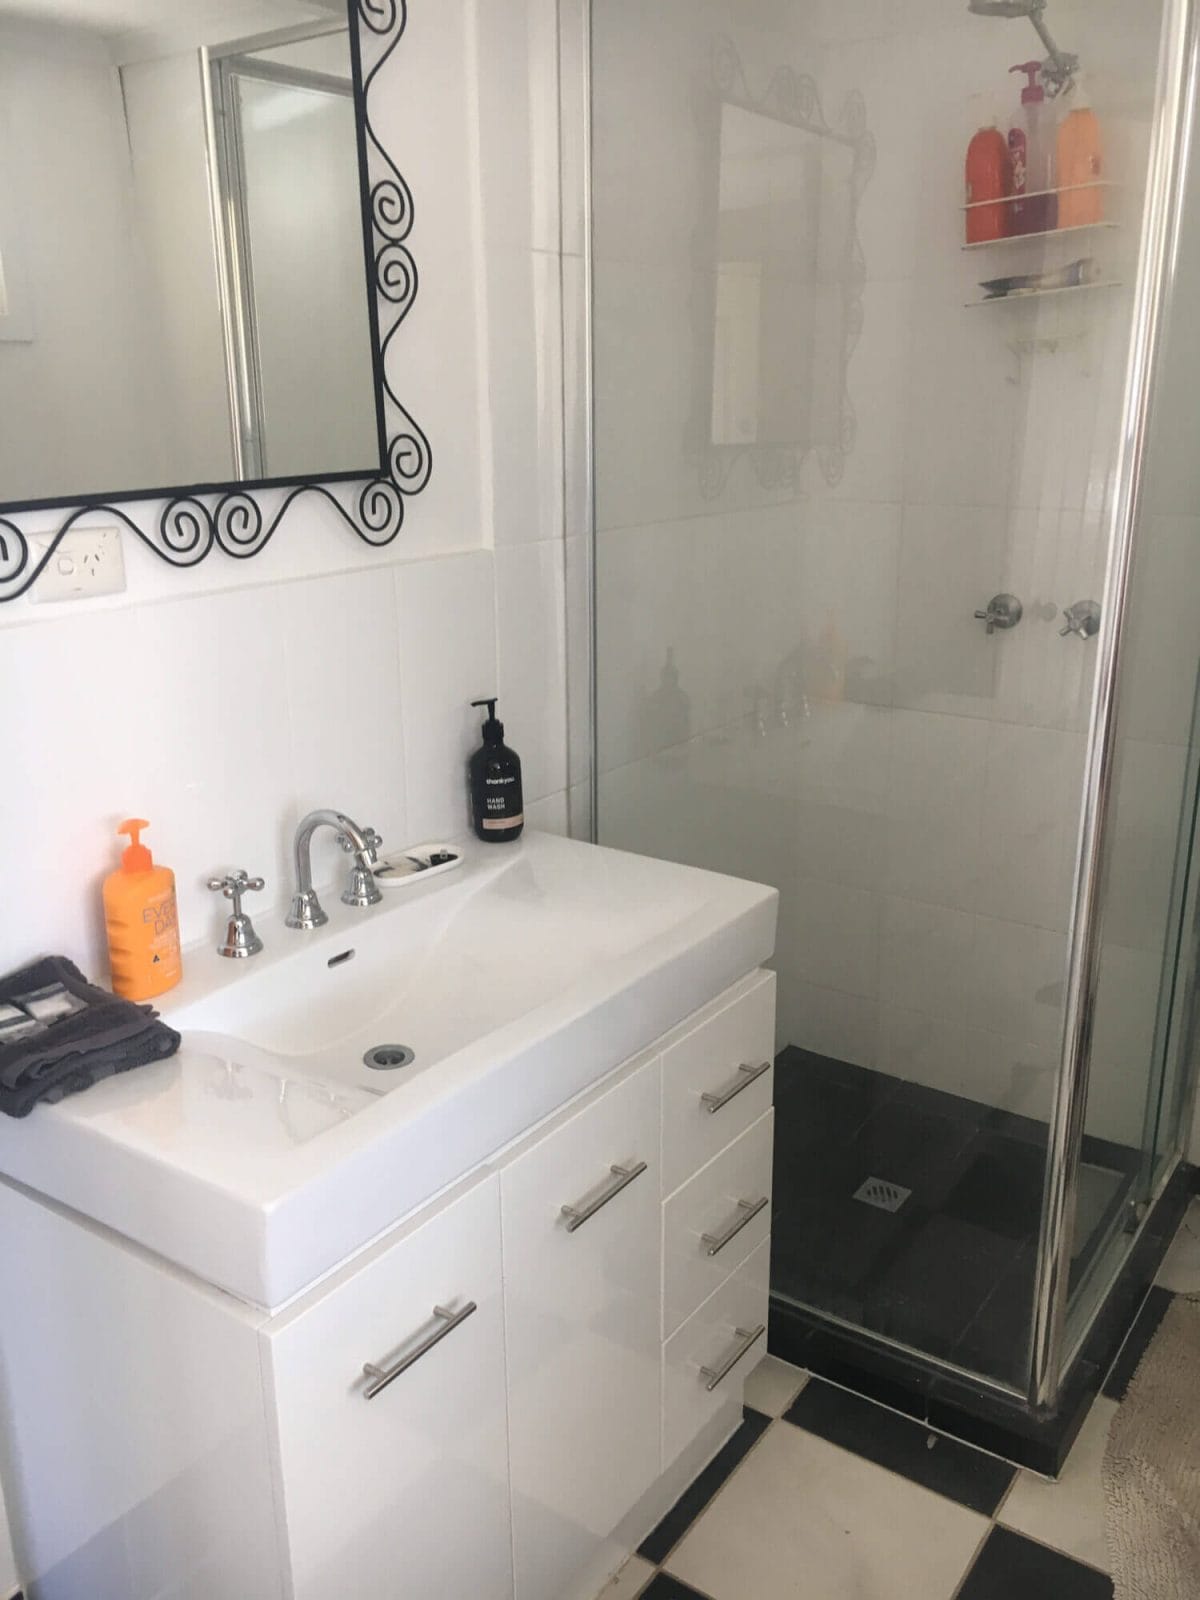 Weekender - Accommodation in Bremer Bay - 21 Barbara Street. Newly renovated bathroom (No bath - shower only)